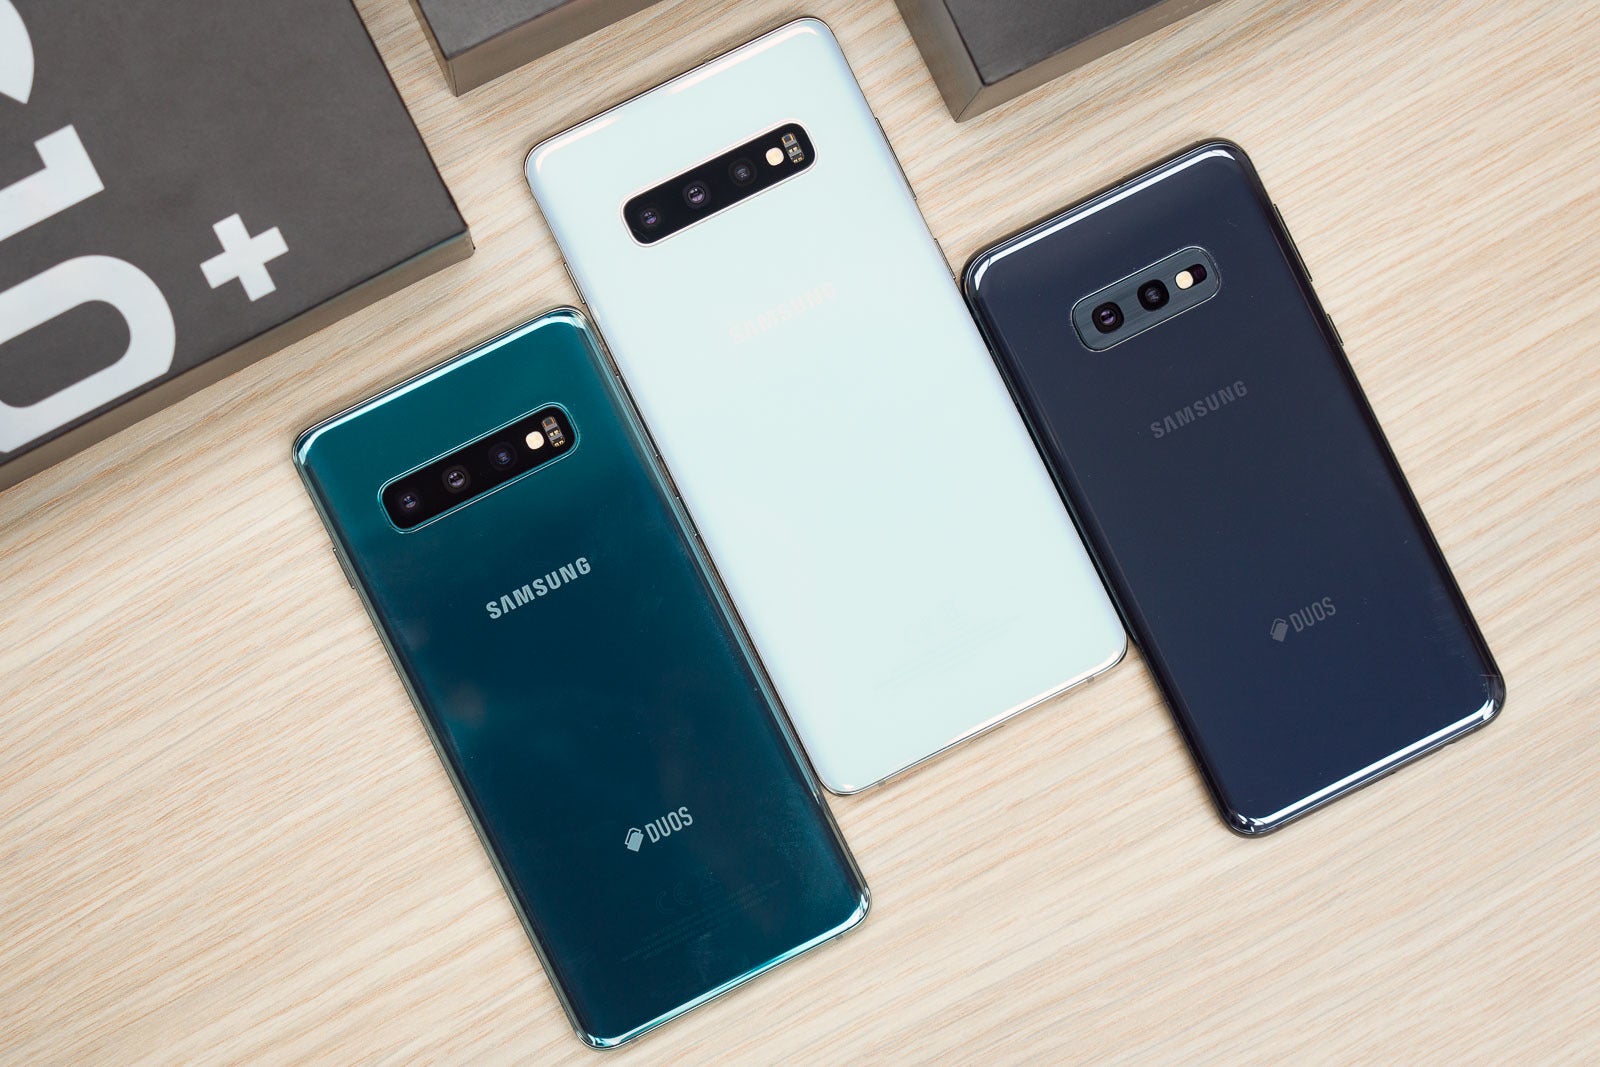 Samsung Galaxy S10 series - Apple's iPhone XR was the best-selling iPhone in the US last quarter